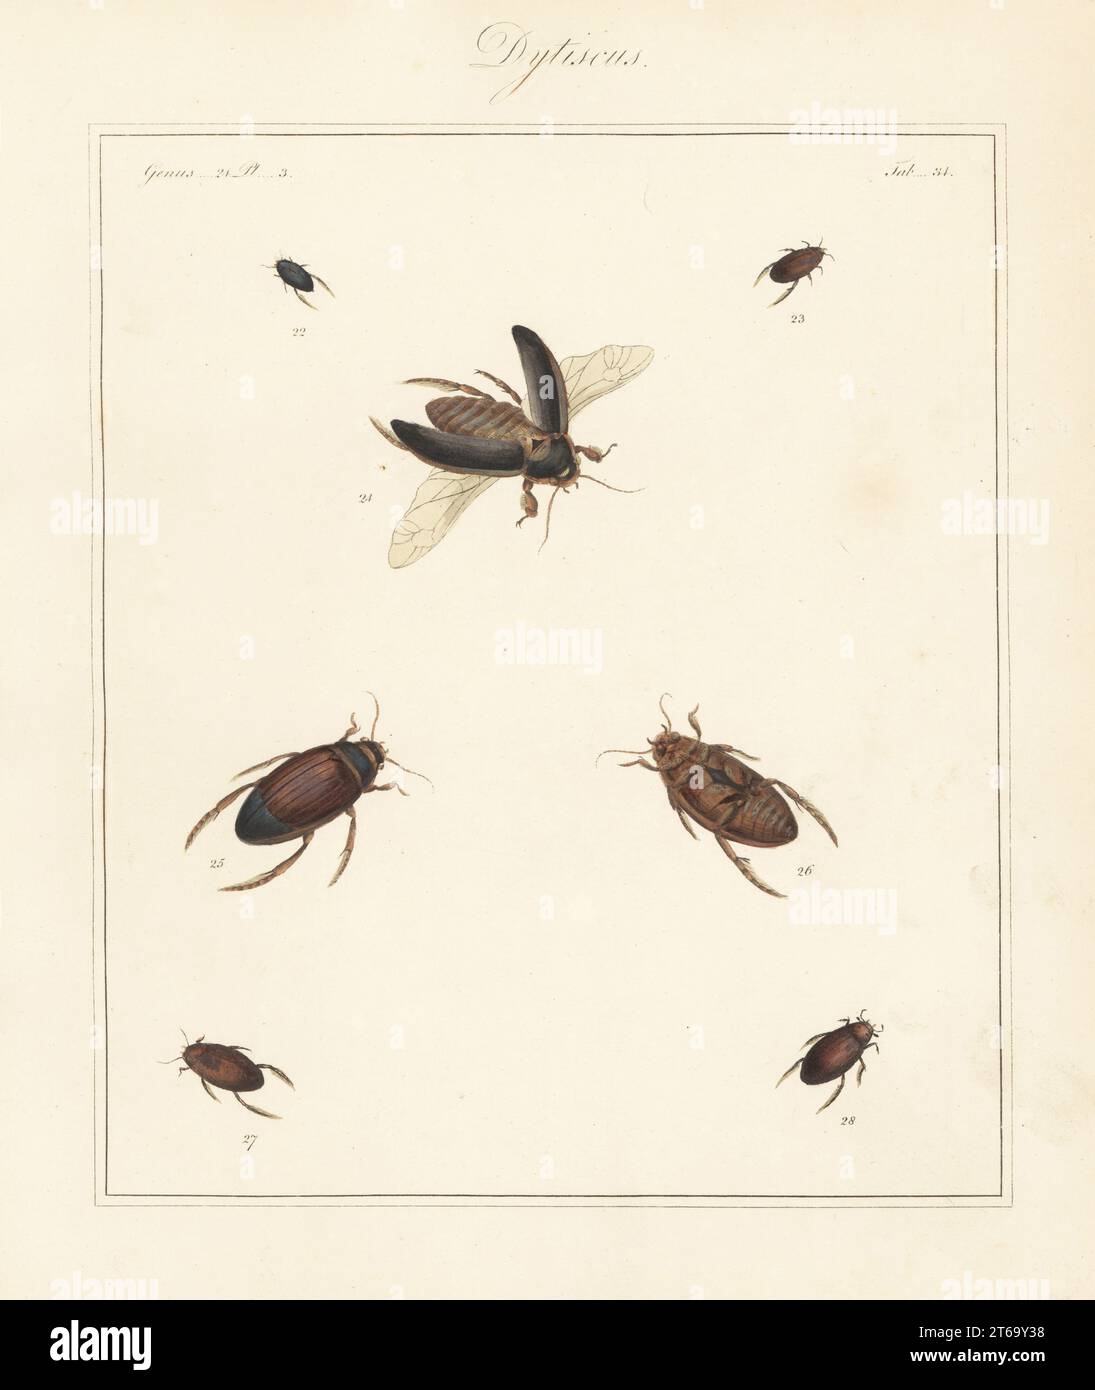 Great diving beetle, Dytiscus marginalis 24, Dytiscus semistriatus 25,26, Colymbetes striatus 27, and lesser silver water beetle, Hydrochara caraboides 28, unknown Dytiscus species 22,23. Handcoloured copperplate engraving from Thomas Martyns The English Entomologist, Exhibiting all the Coleopterous Insects found in England, Academy for Illustrating and Painting Natural History, London, 1792. Stock Photo